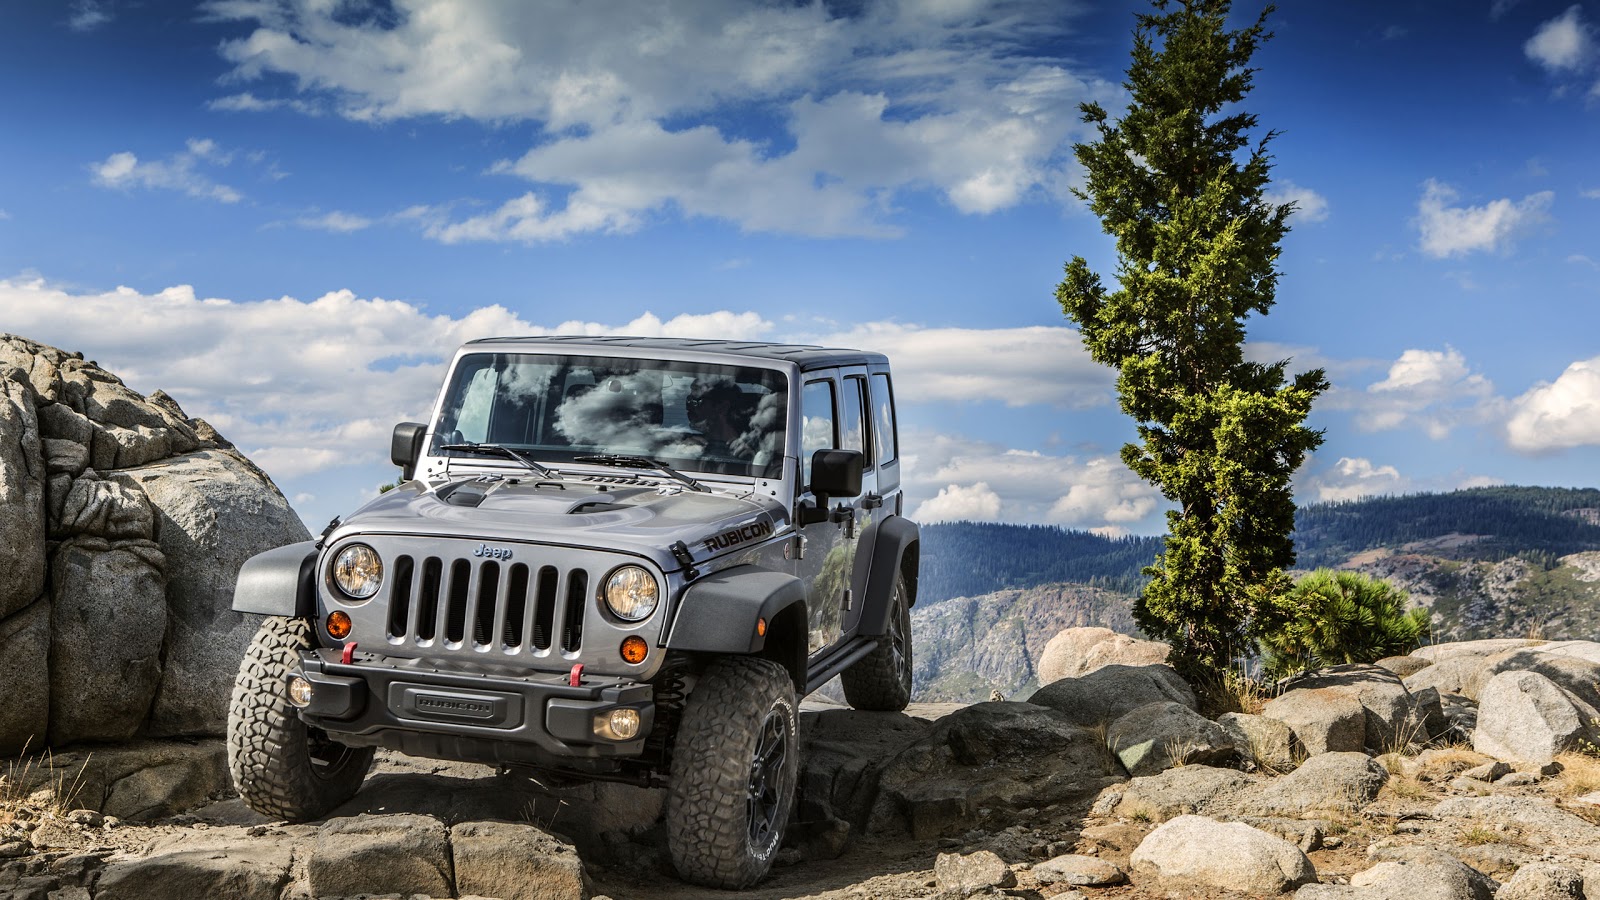 33+ Jeep Front Wallpaper 720 X 1280 free download